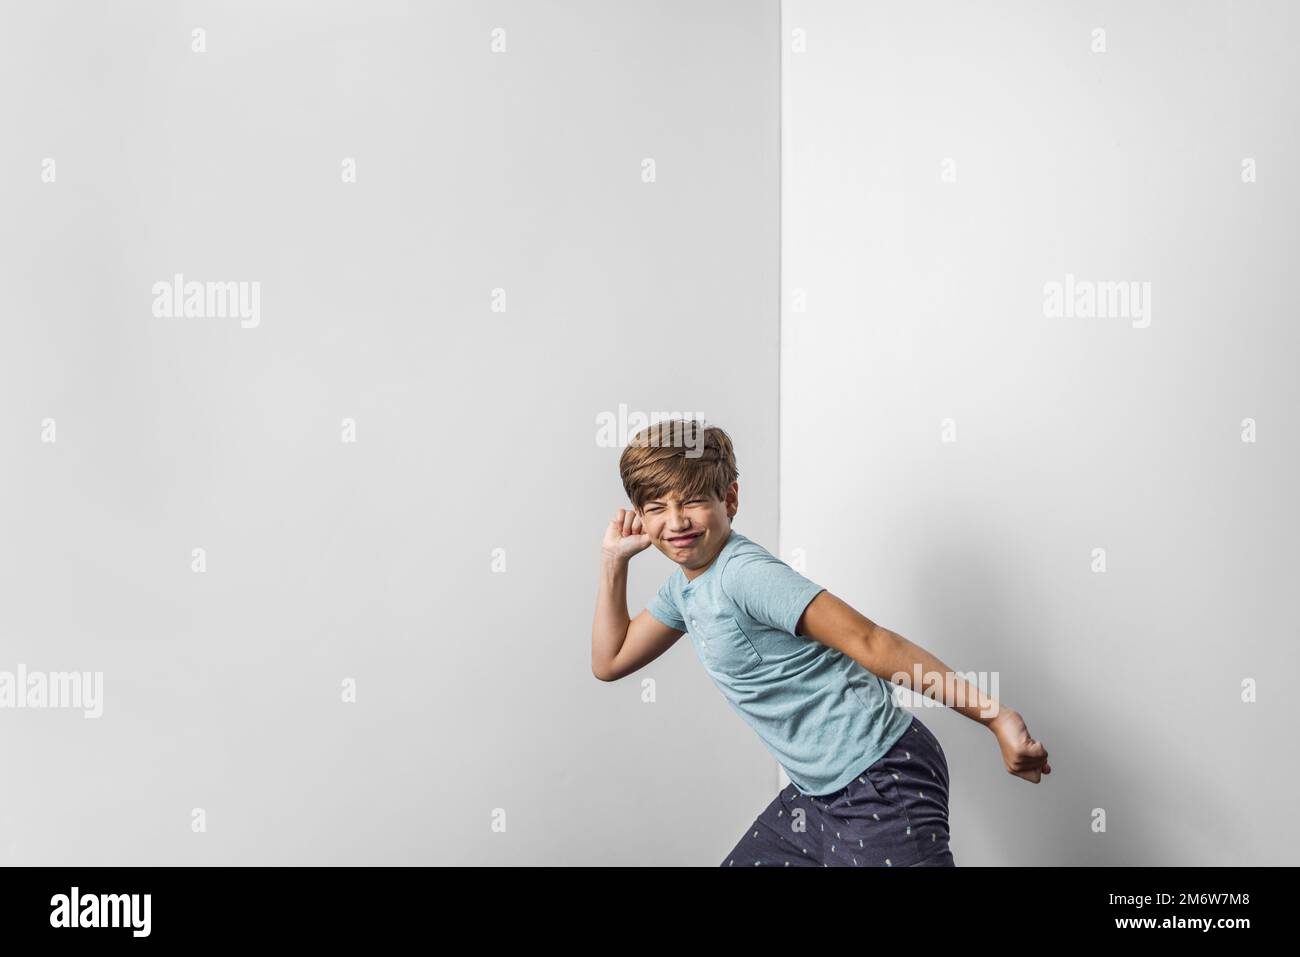 A pre-teen tween boy making a funny scrunched up face looking like he is about to take off and run Stock Photo